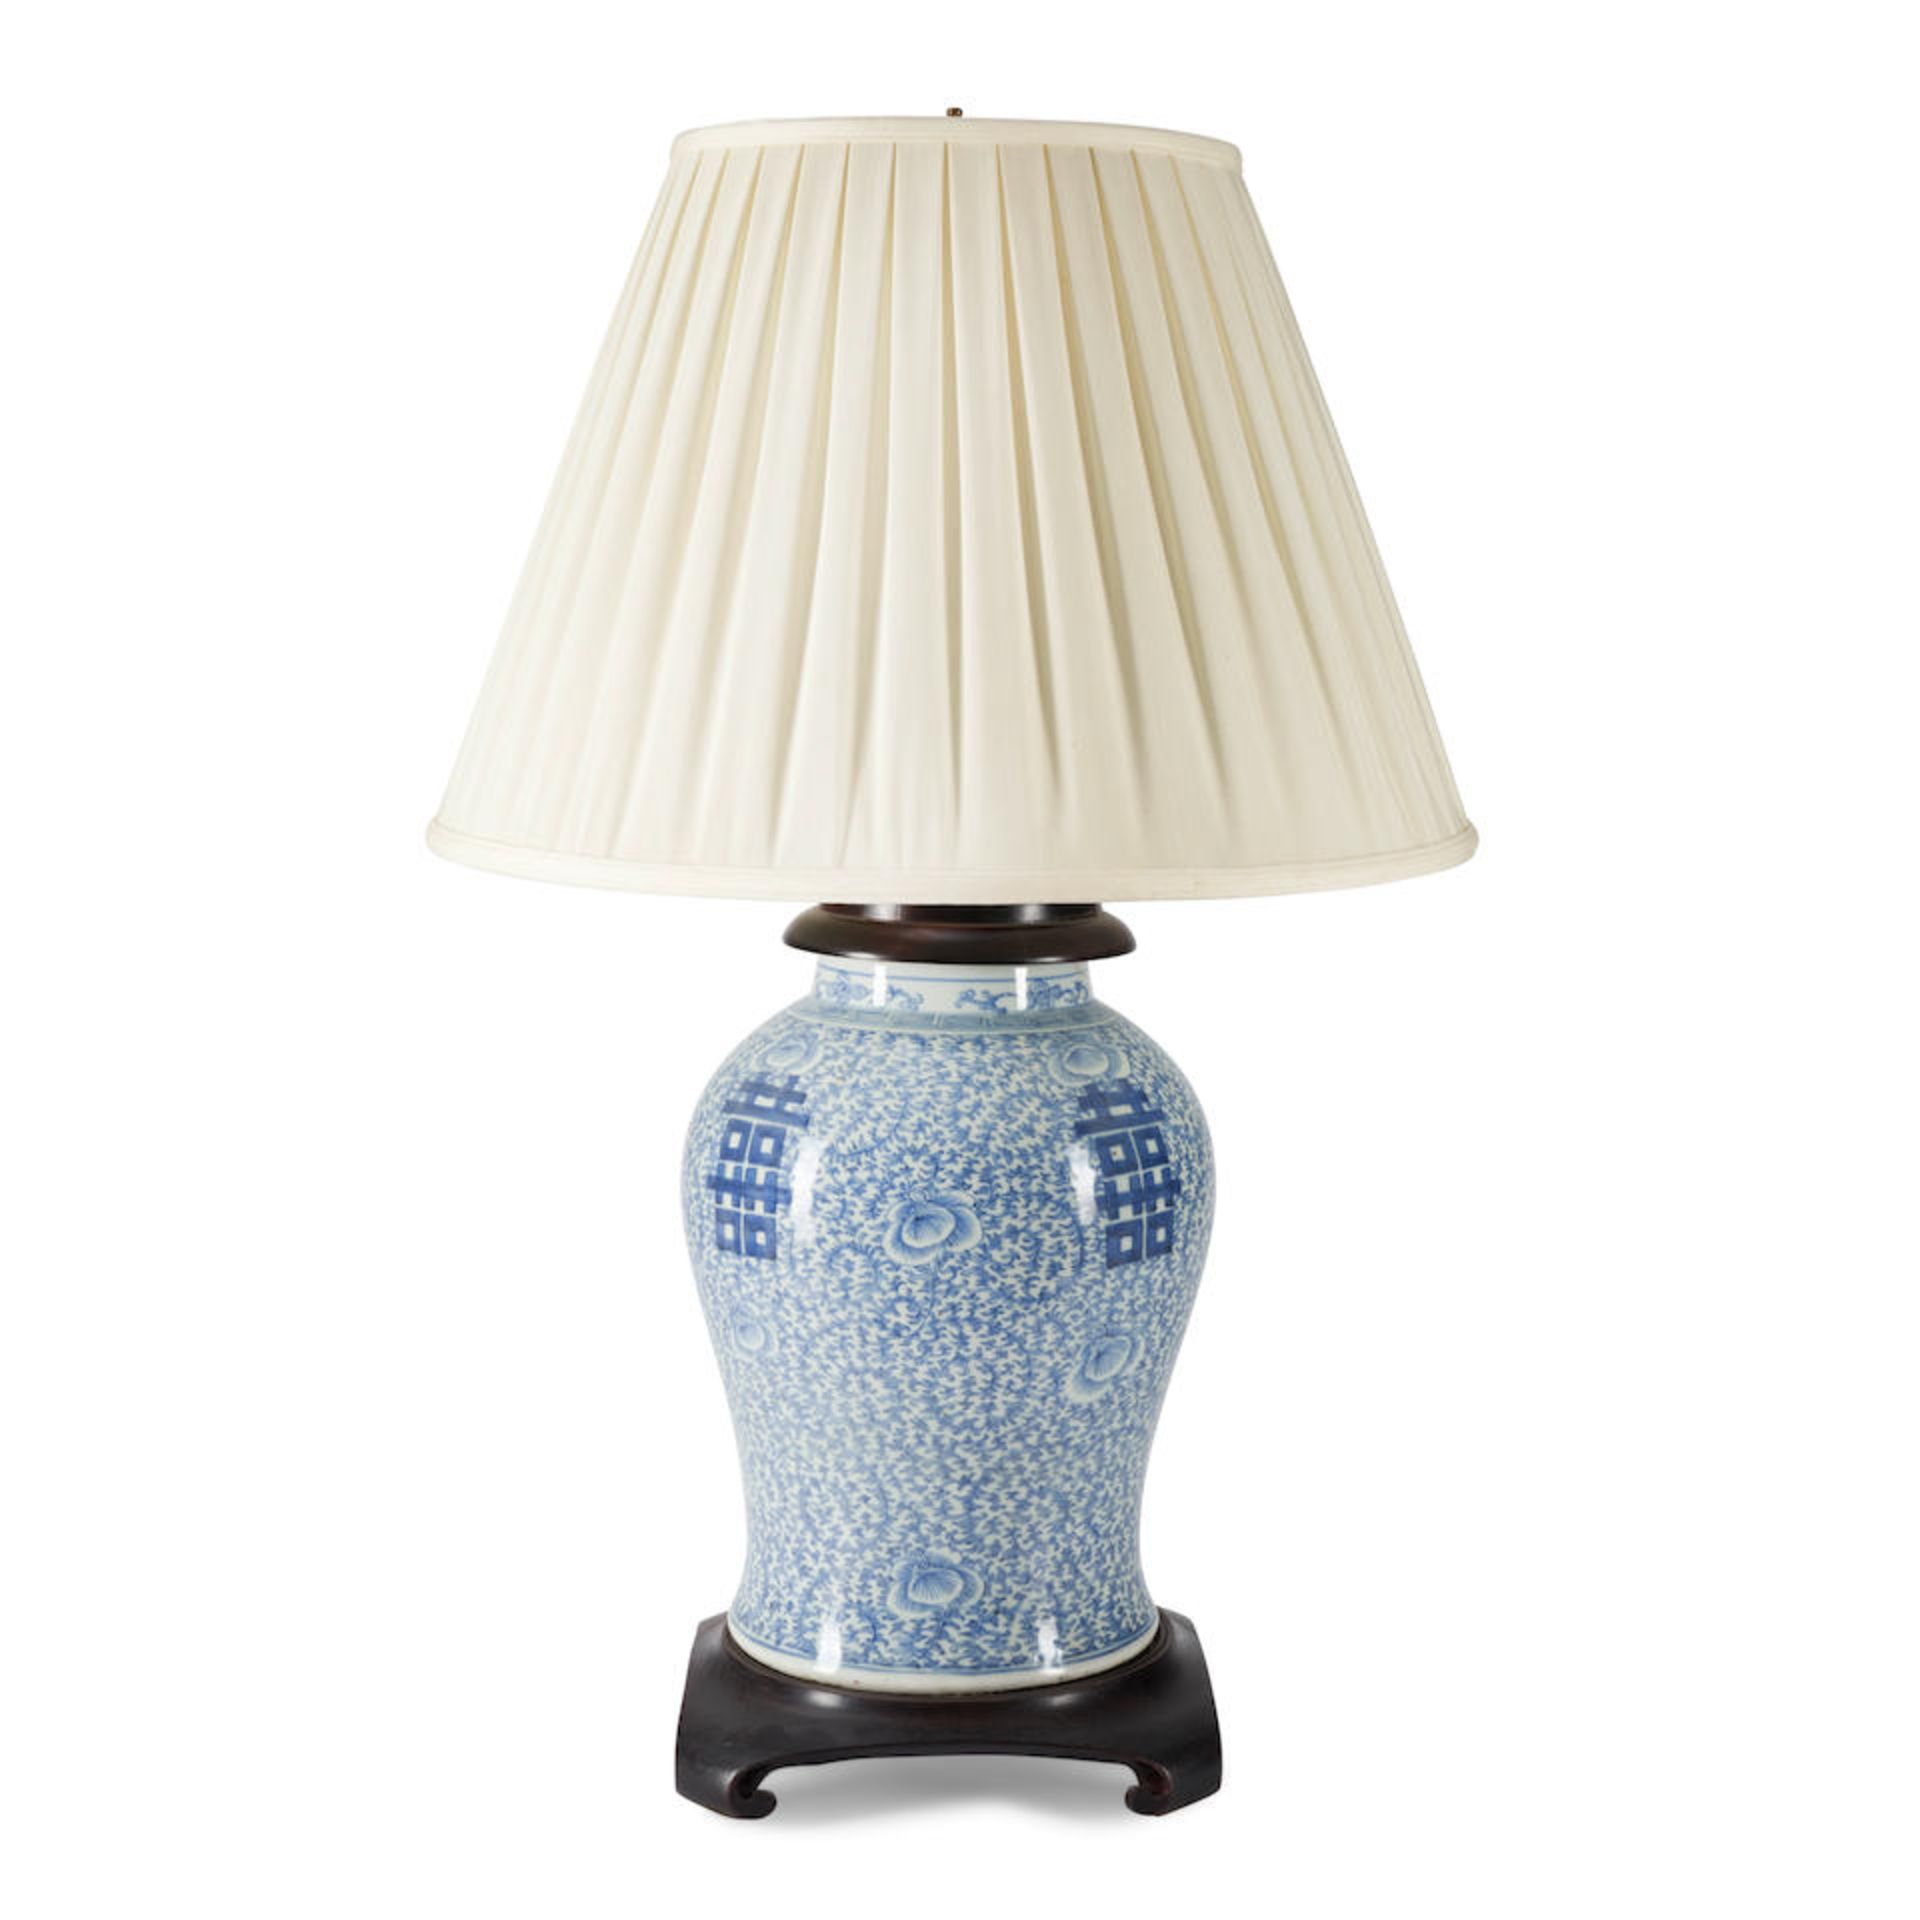 Blue and White Baluster Vase Mounted as Lamp, China, 20th/21st century.